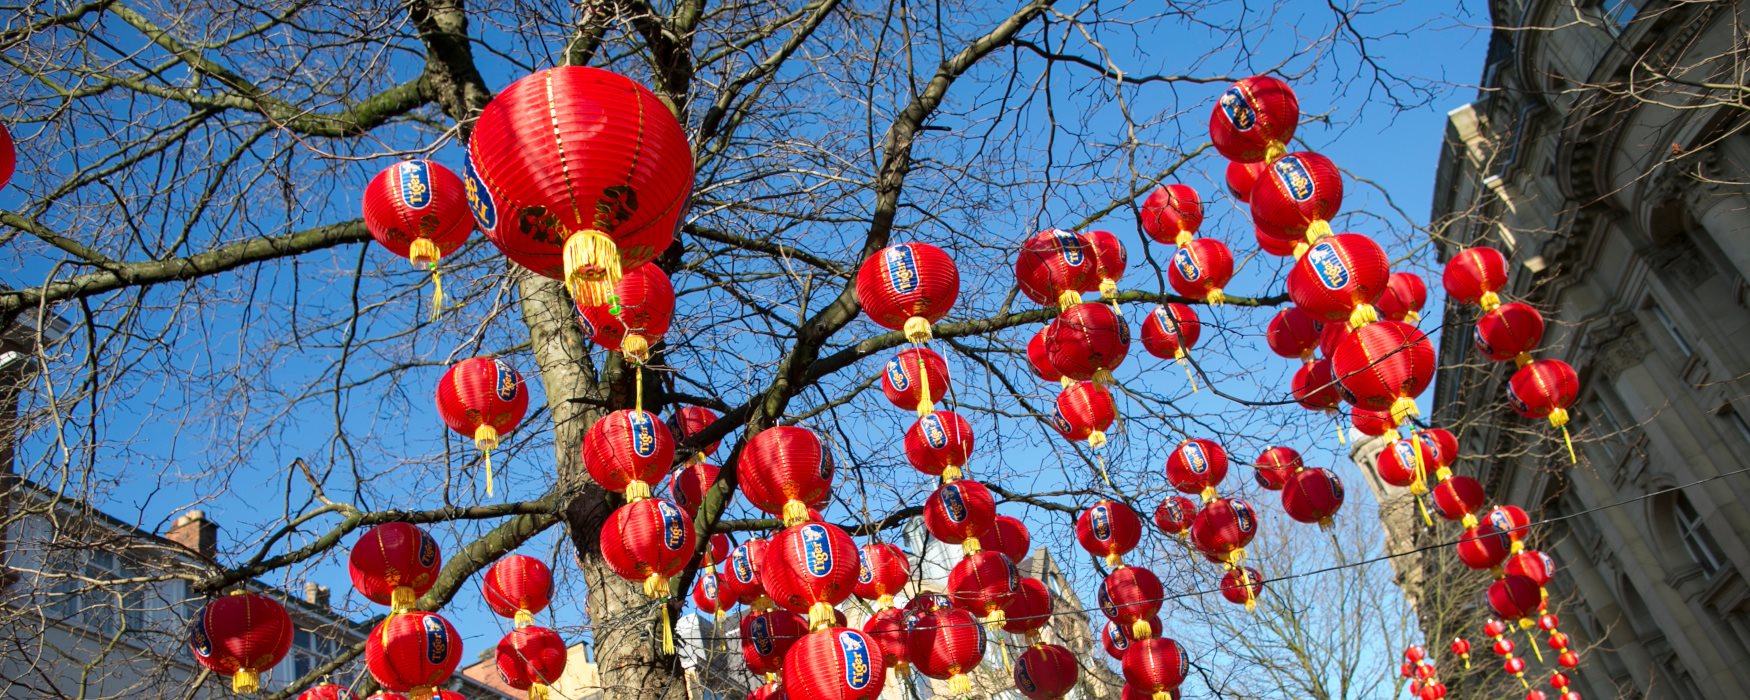 Chinese New Year lanterns in Manchester City Centre